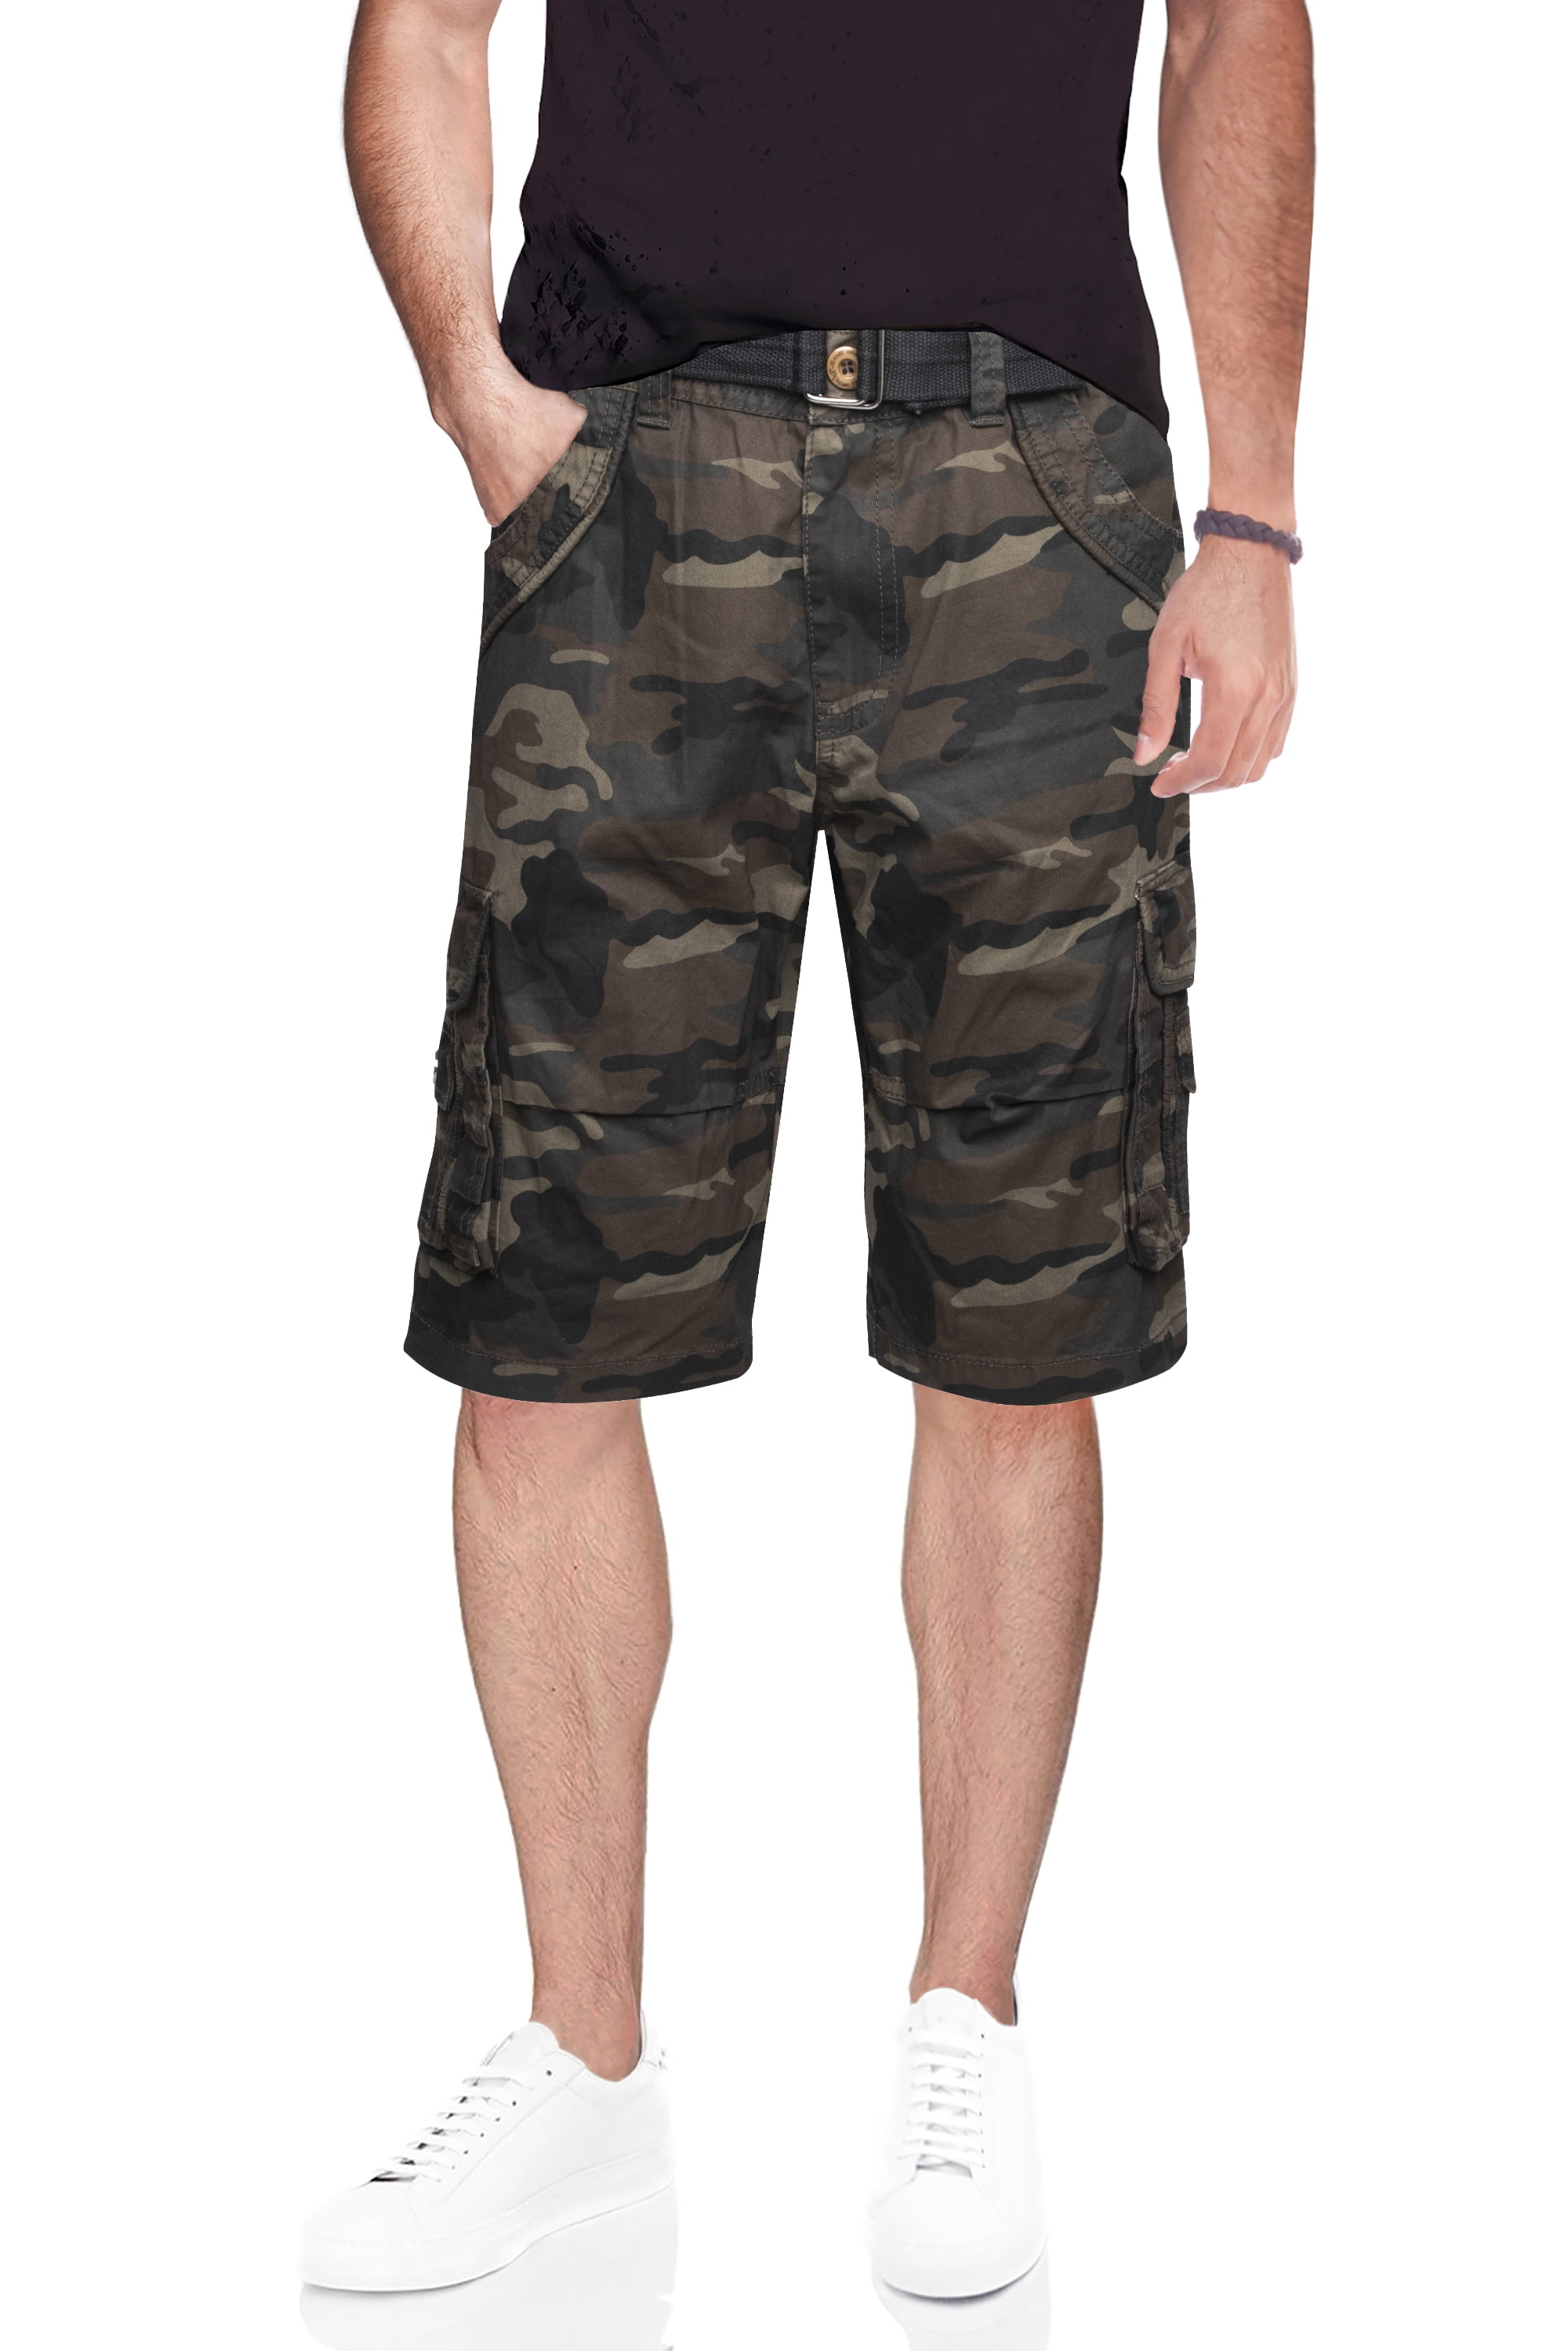 X RAY Mens Tactical Bermuda Cargo Shorts Camo and Solid Colors 12.5 Inseam Knee Length Classic Fit Multi Pocket 